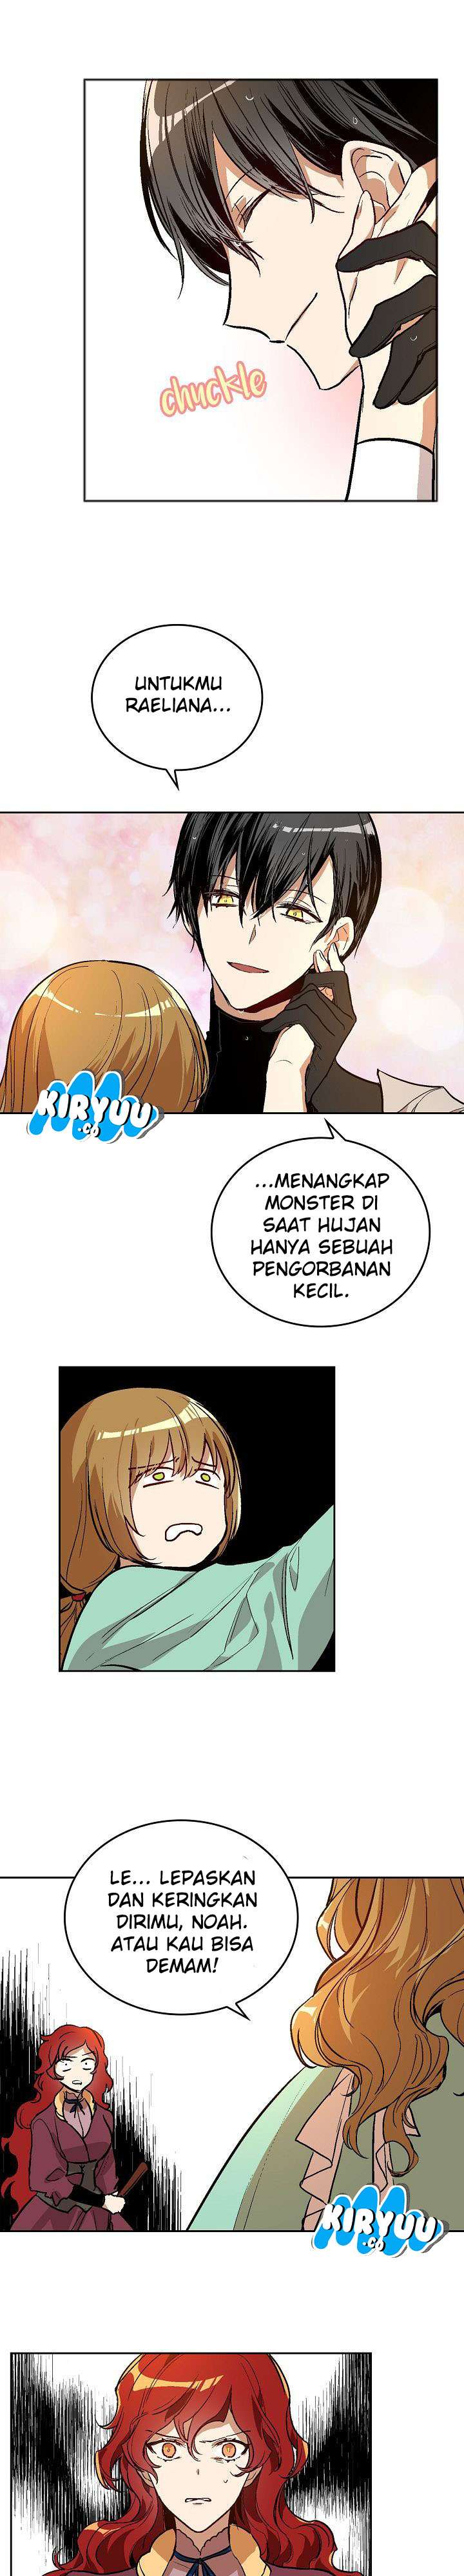 The Reason Why Raeliana Ended Up at the Duke’s Mansion Chapter 33 Bahasa Indonesia